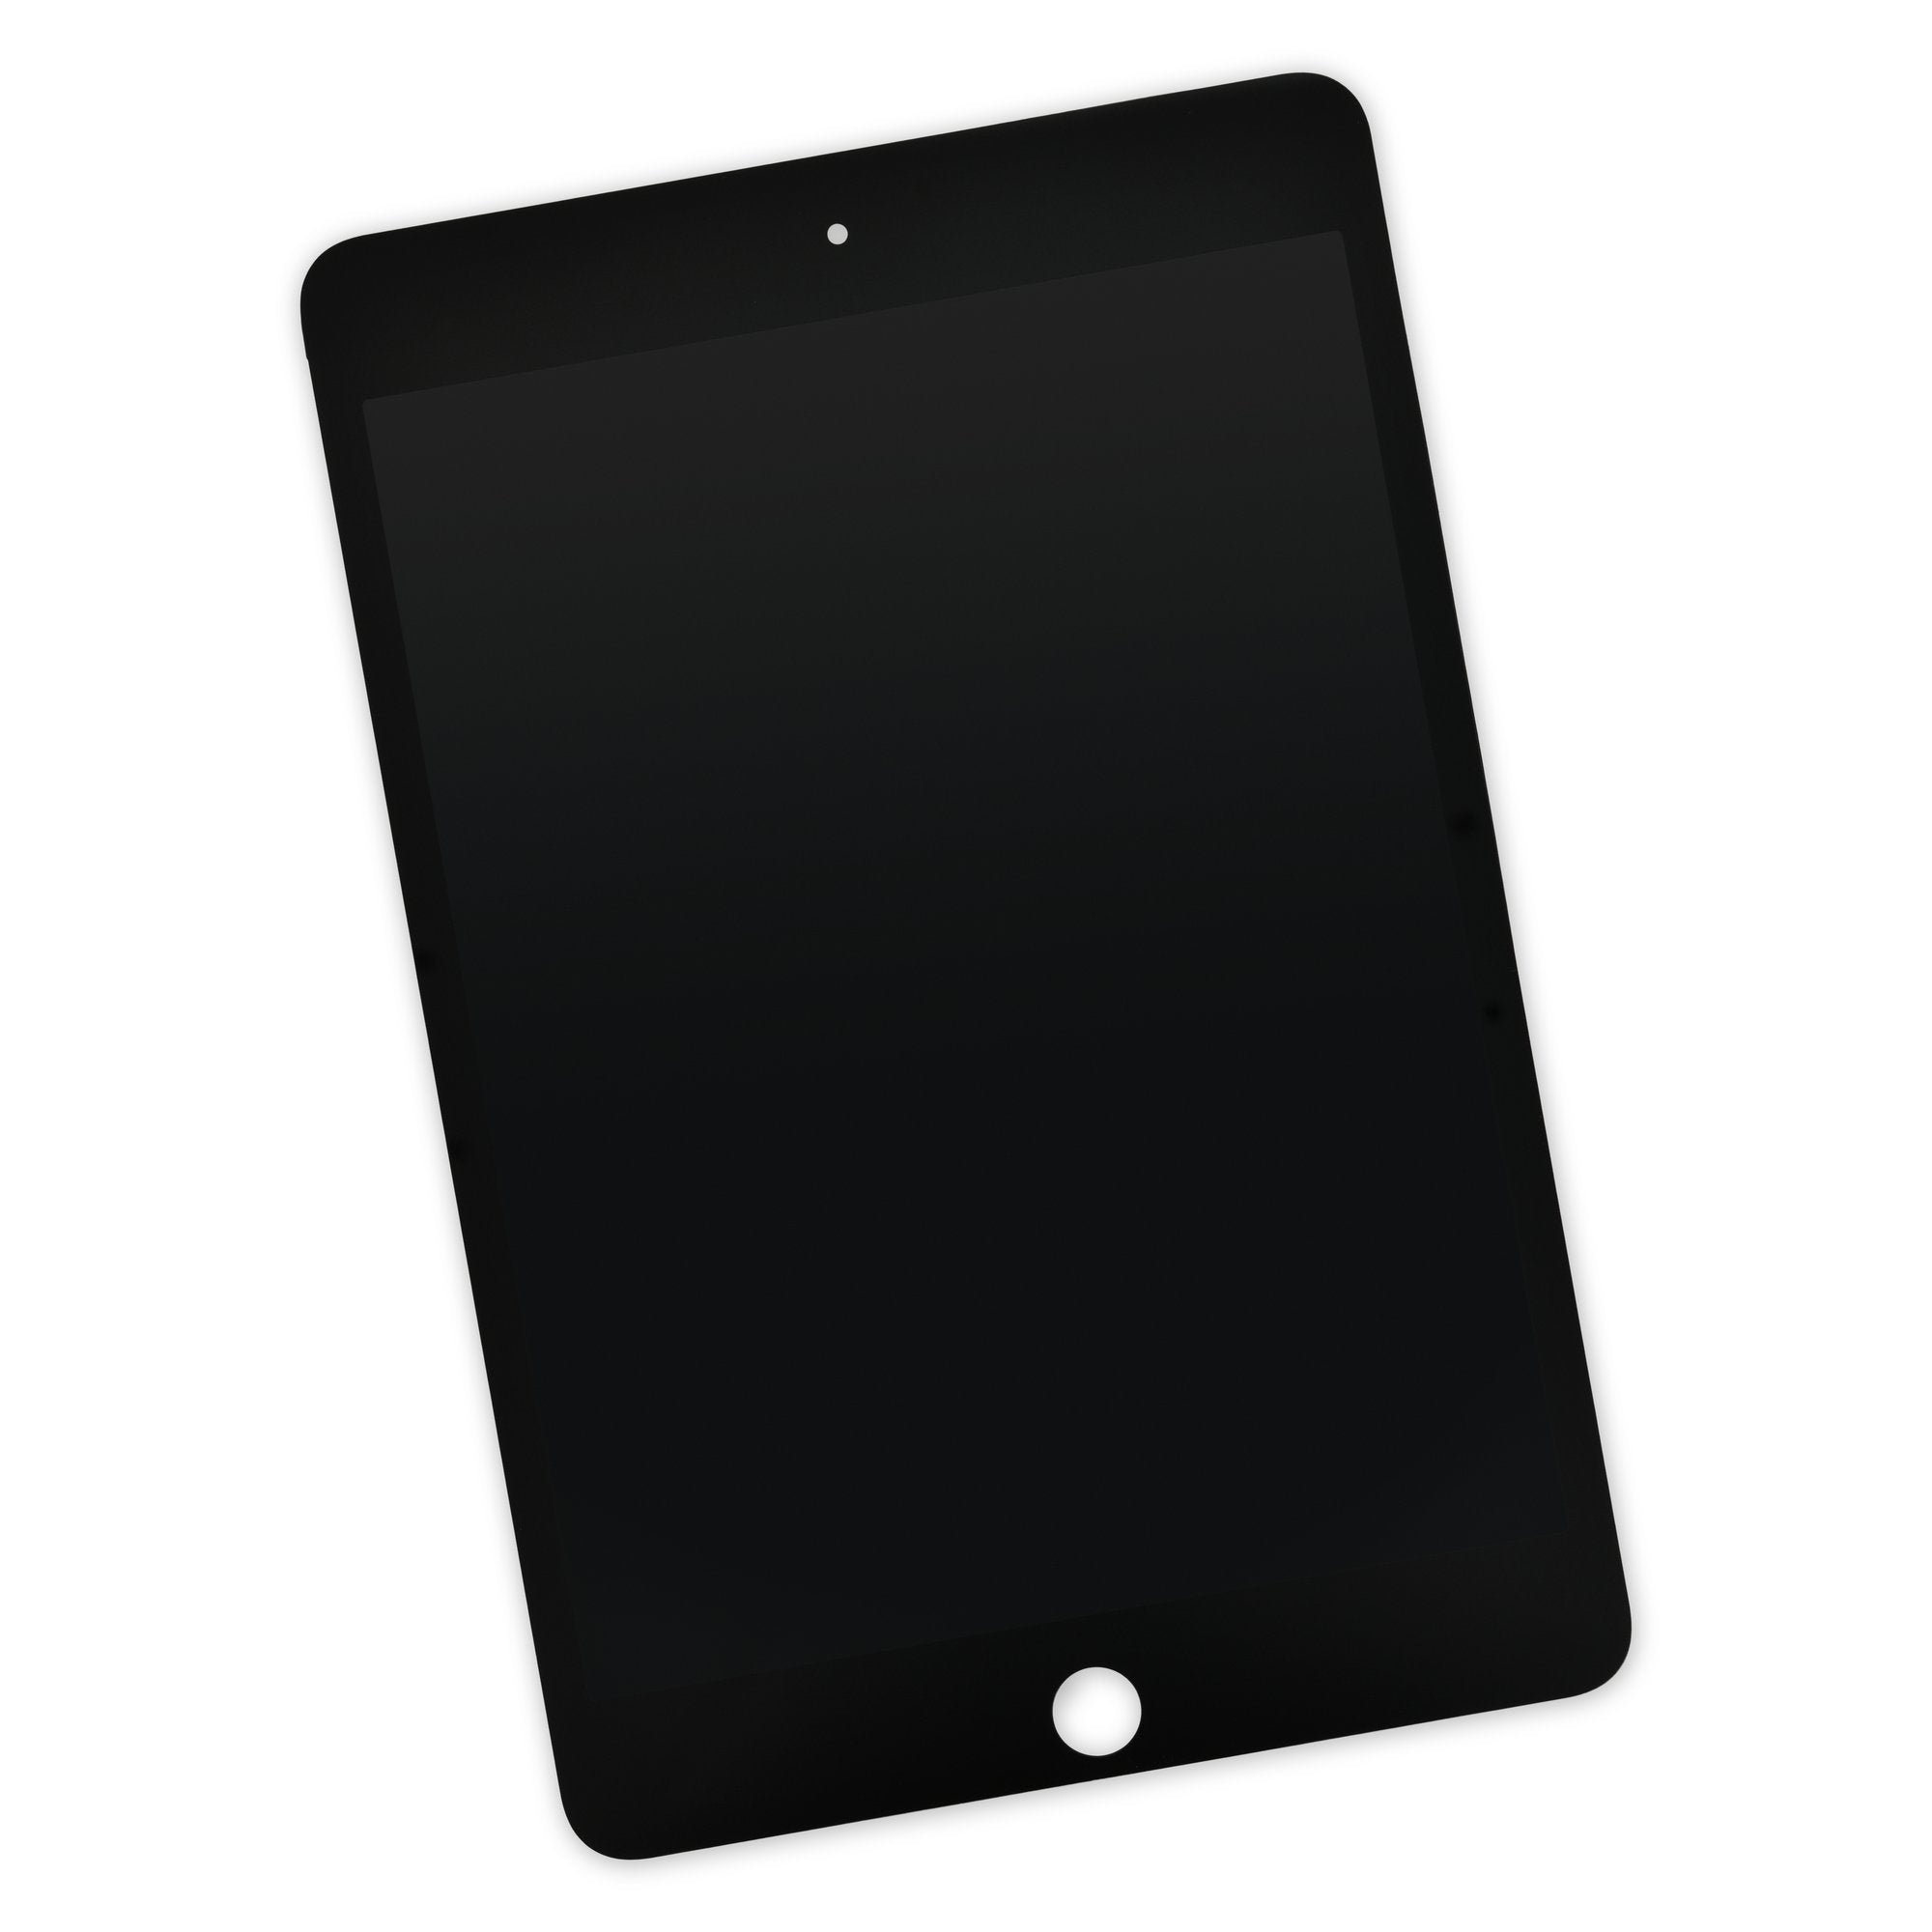 iPad mini 5 A2133/A2124/A2126 Screen: LCD Replacement Part